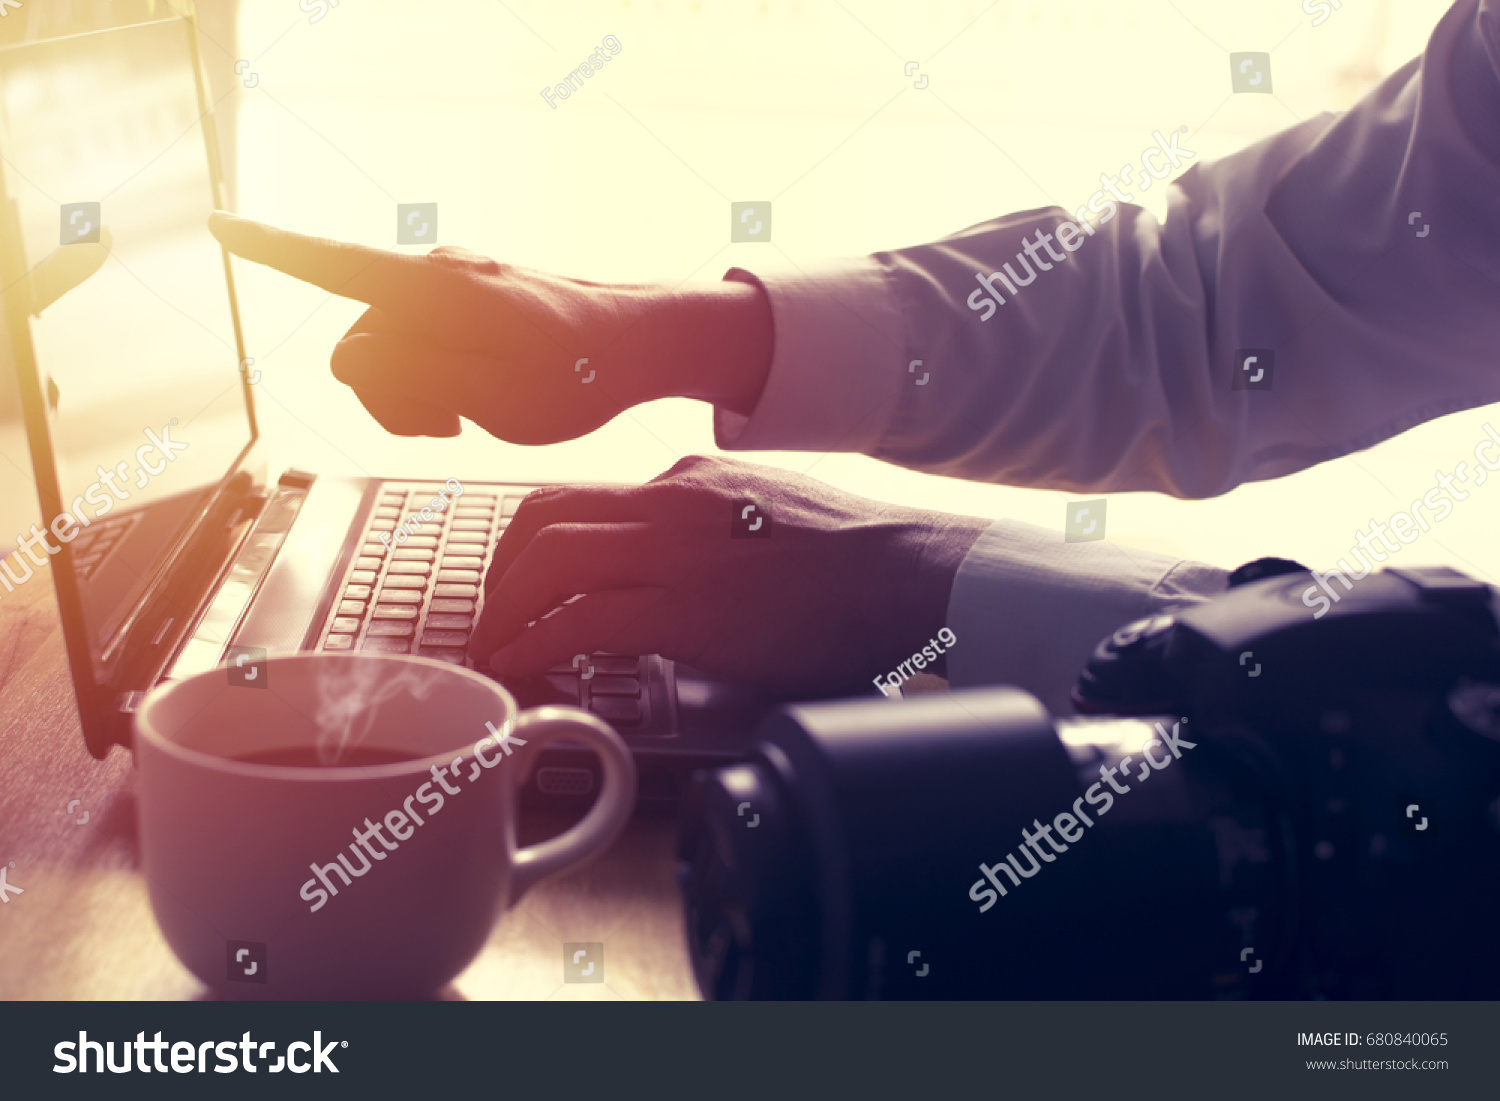 Man hand is using laptop and pointing on screen. Soft focus on hand. #680840065